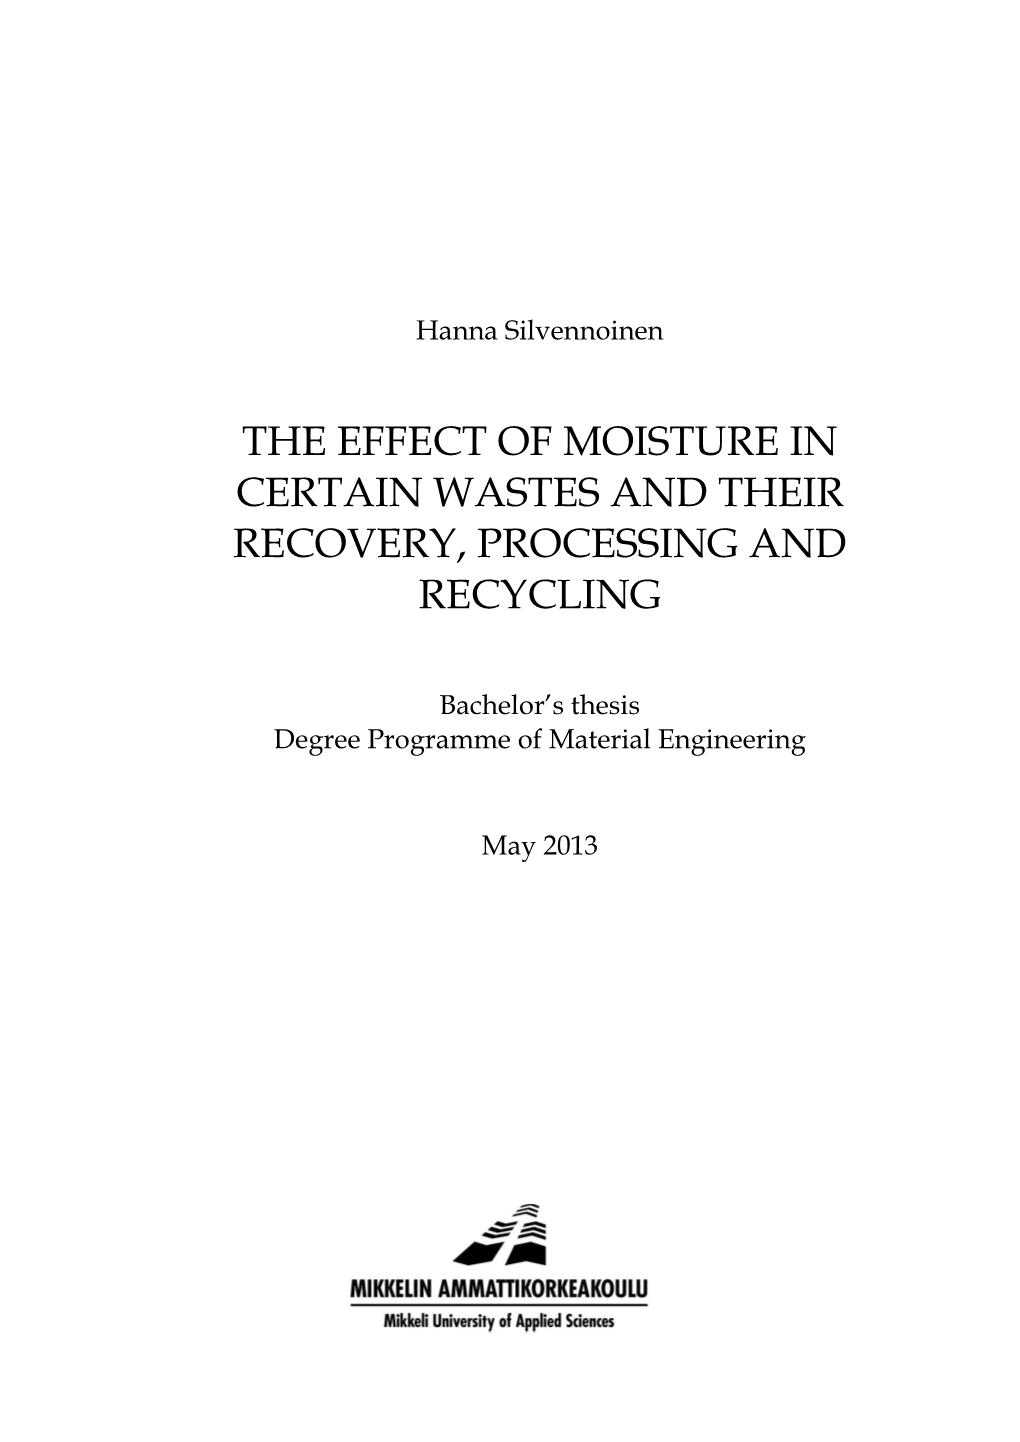 The Effect of Moisture in Certain Wastes and Their Recovery, Processing and Recycling